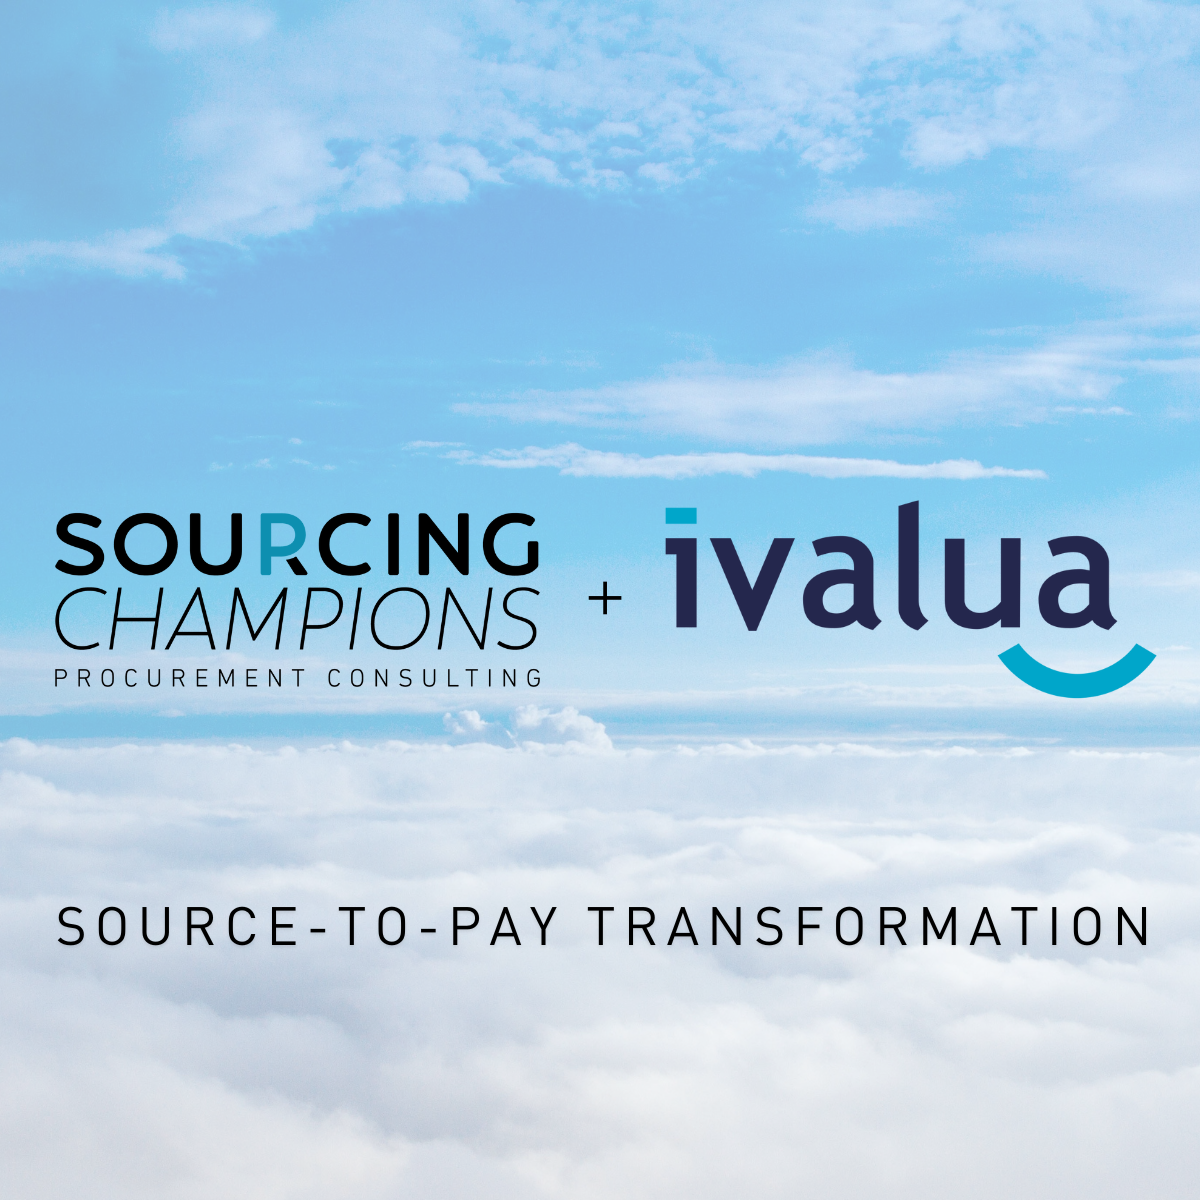 Ivalua and Sourcing Champions Forge Partnership to Drive Source-to-Pay Transformation